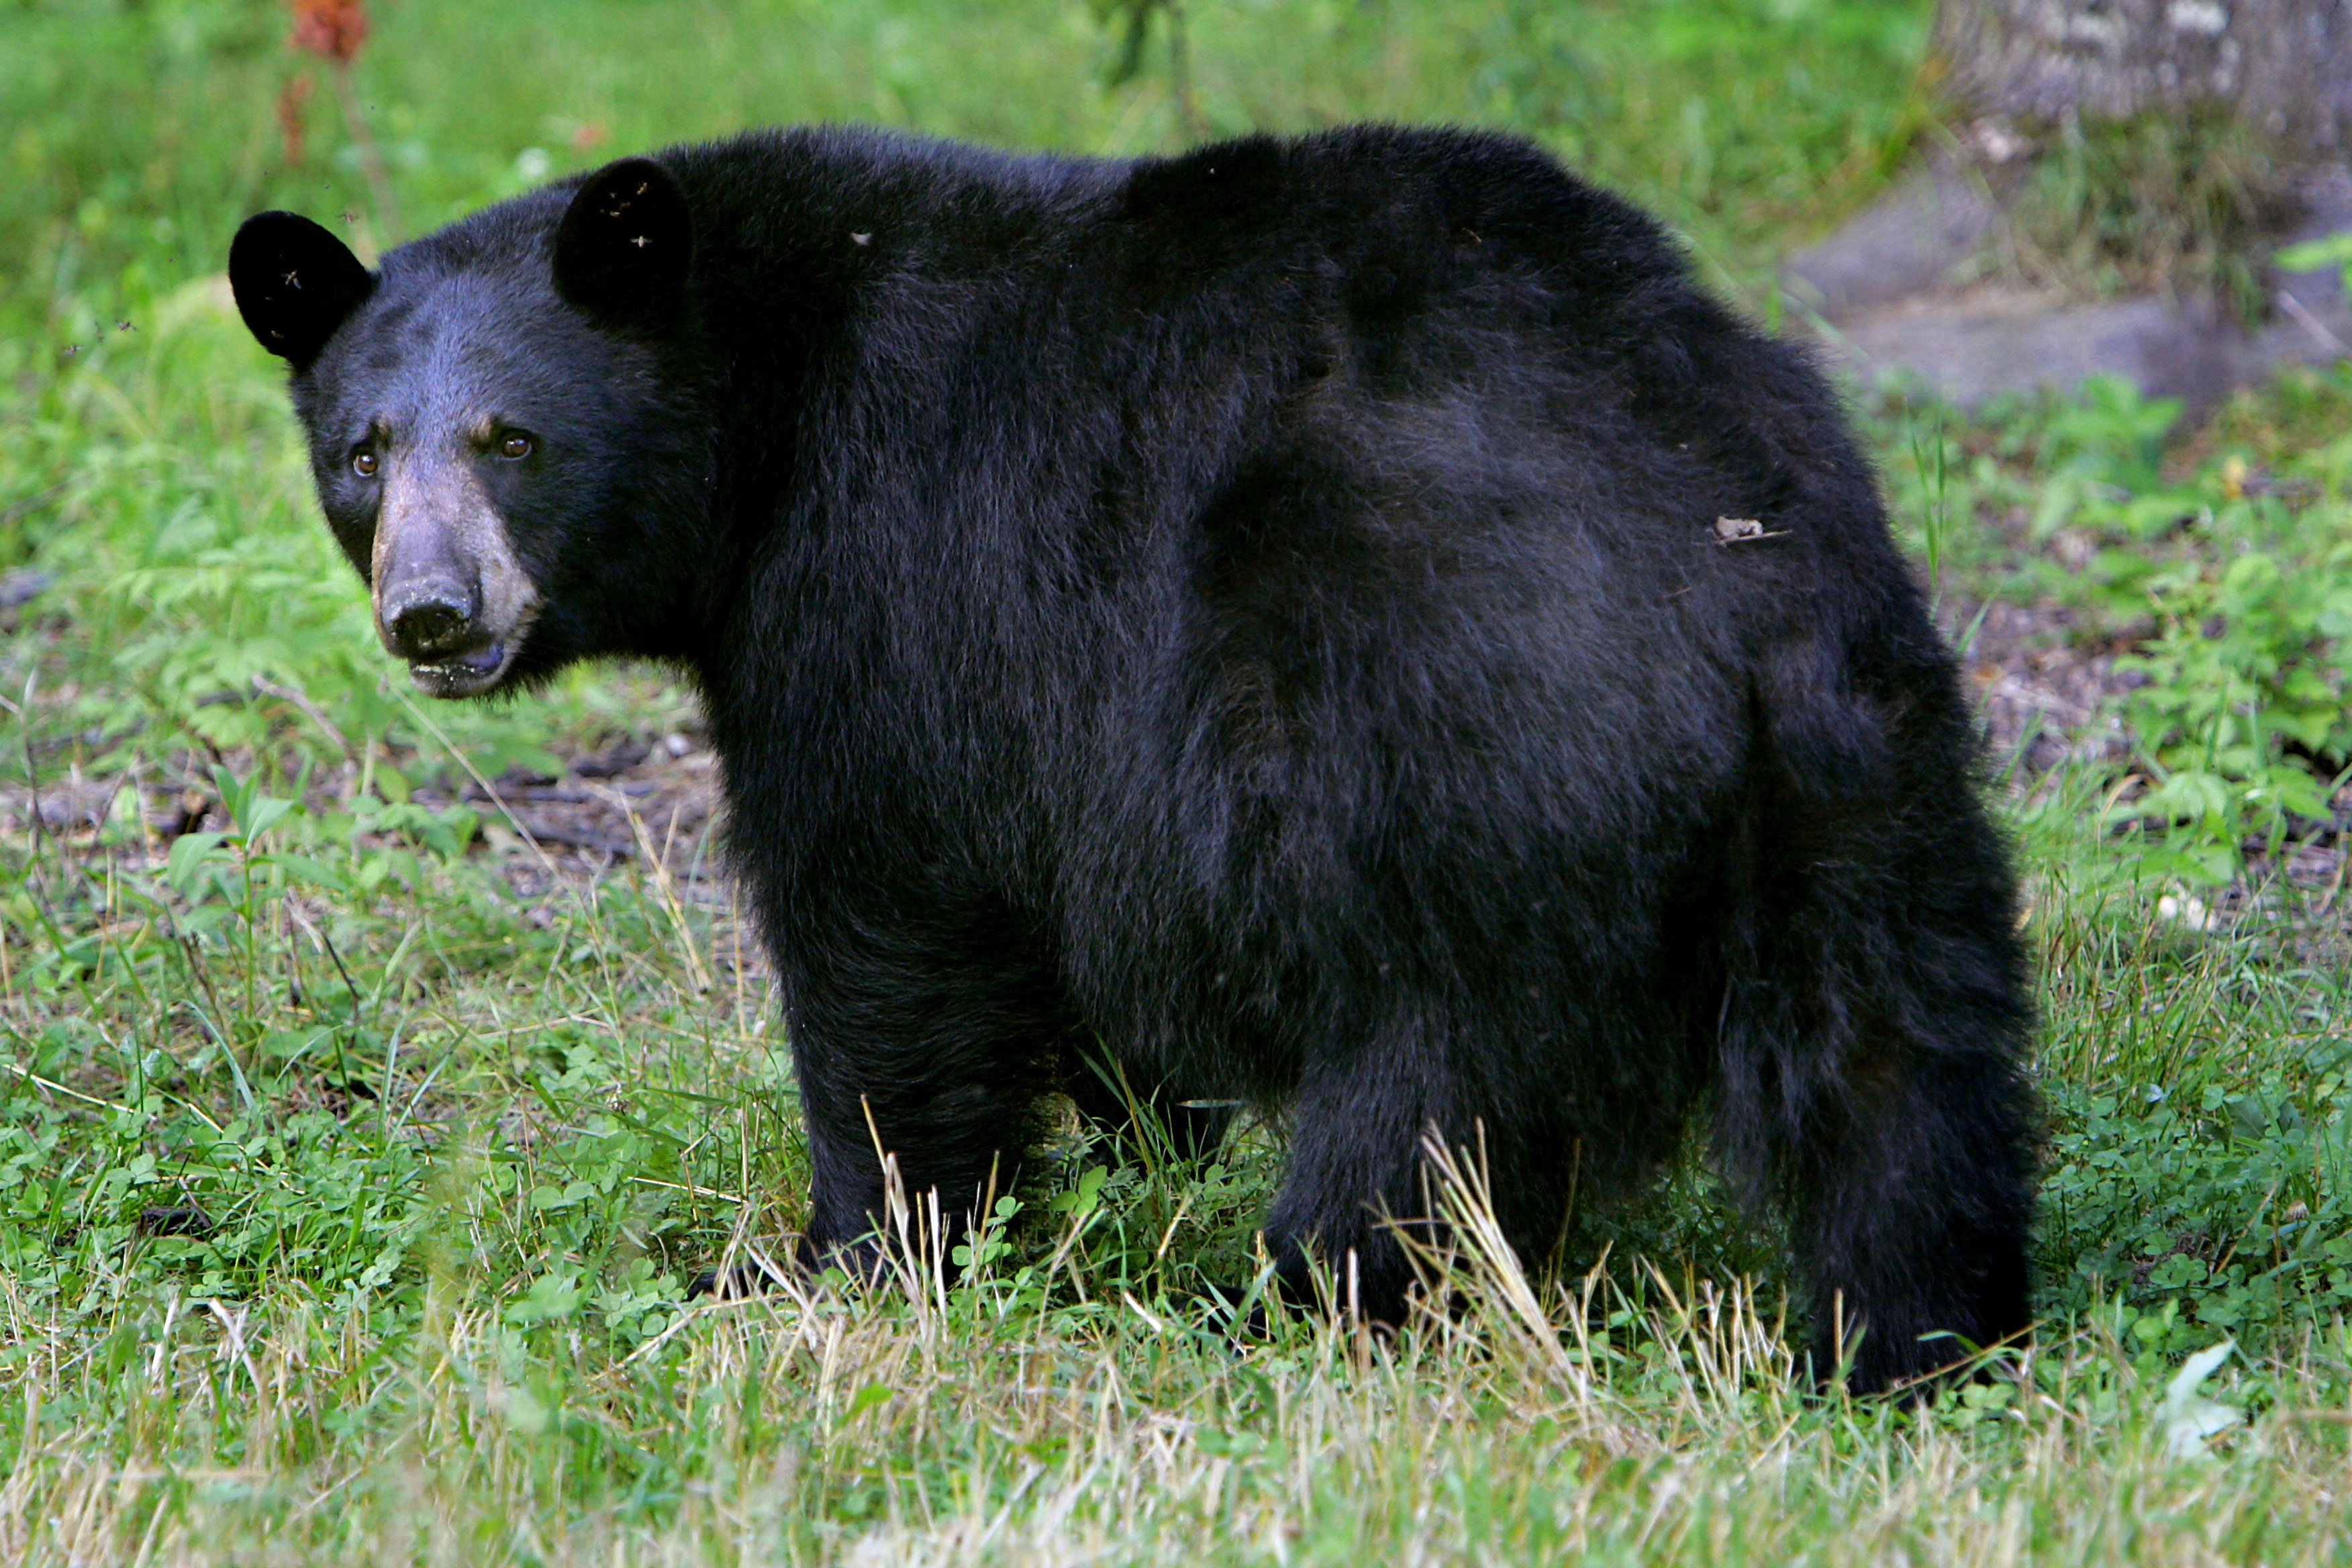 May and June: Increase in bears in D.C. area